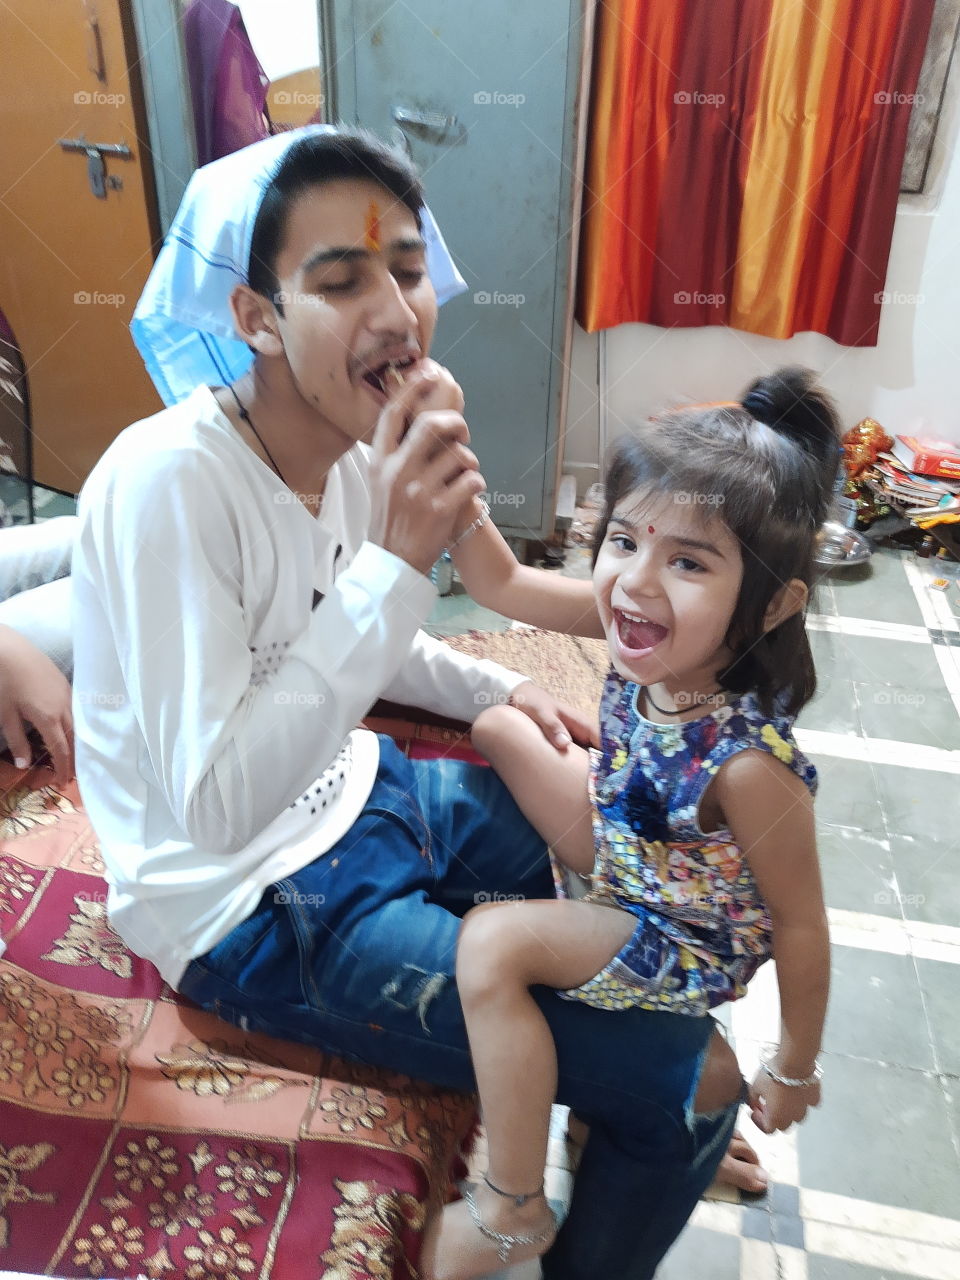 On the occasion of the Indian festival of Bhai Dooj , baby is feeding her brother sweets but has also kept her mouth open.